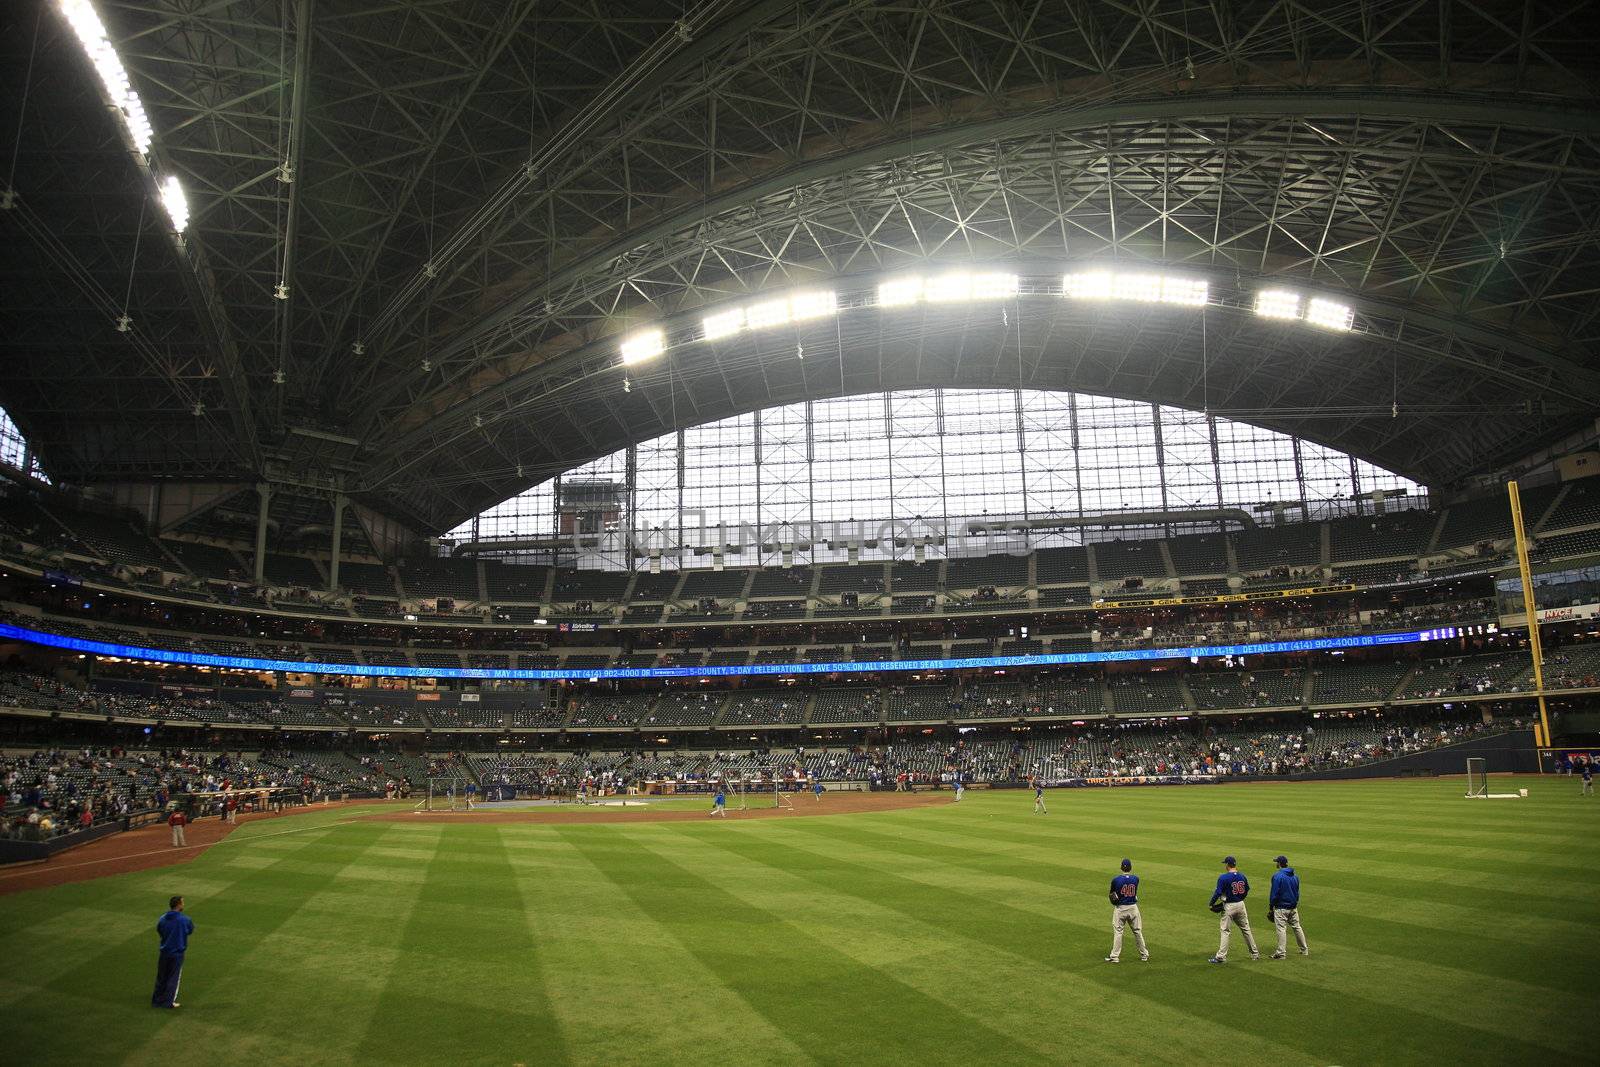 Baseball players conduct batting practice under a closed dome